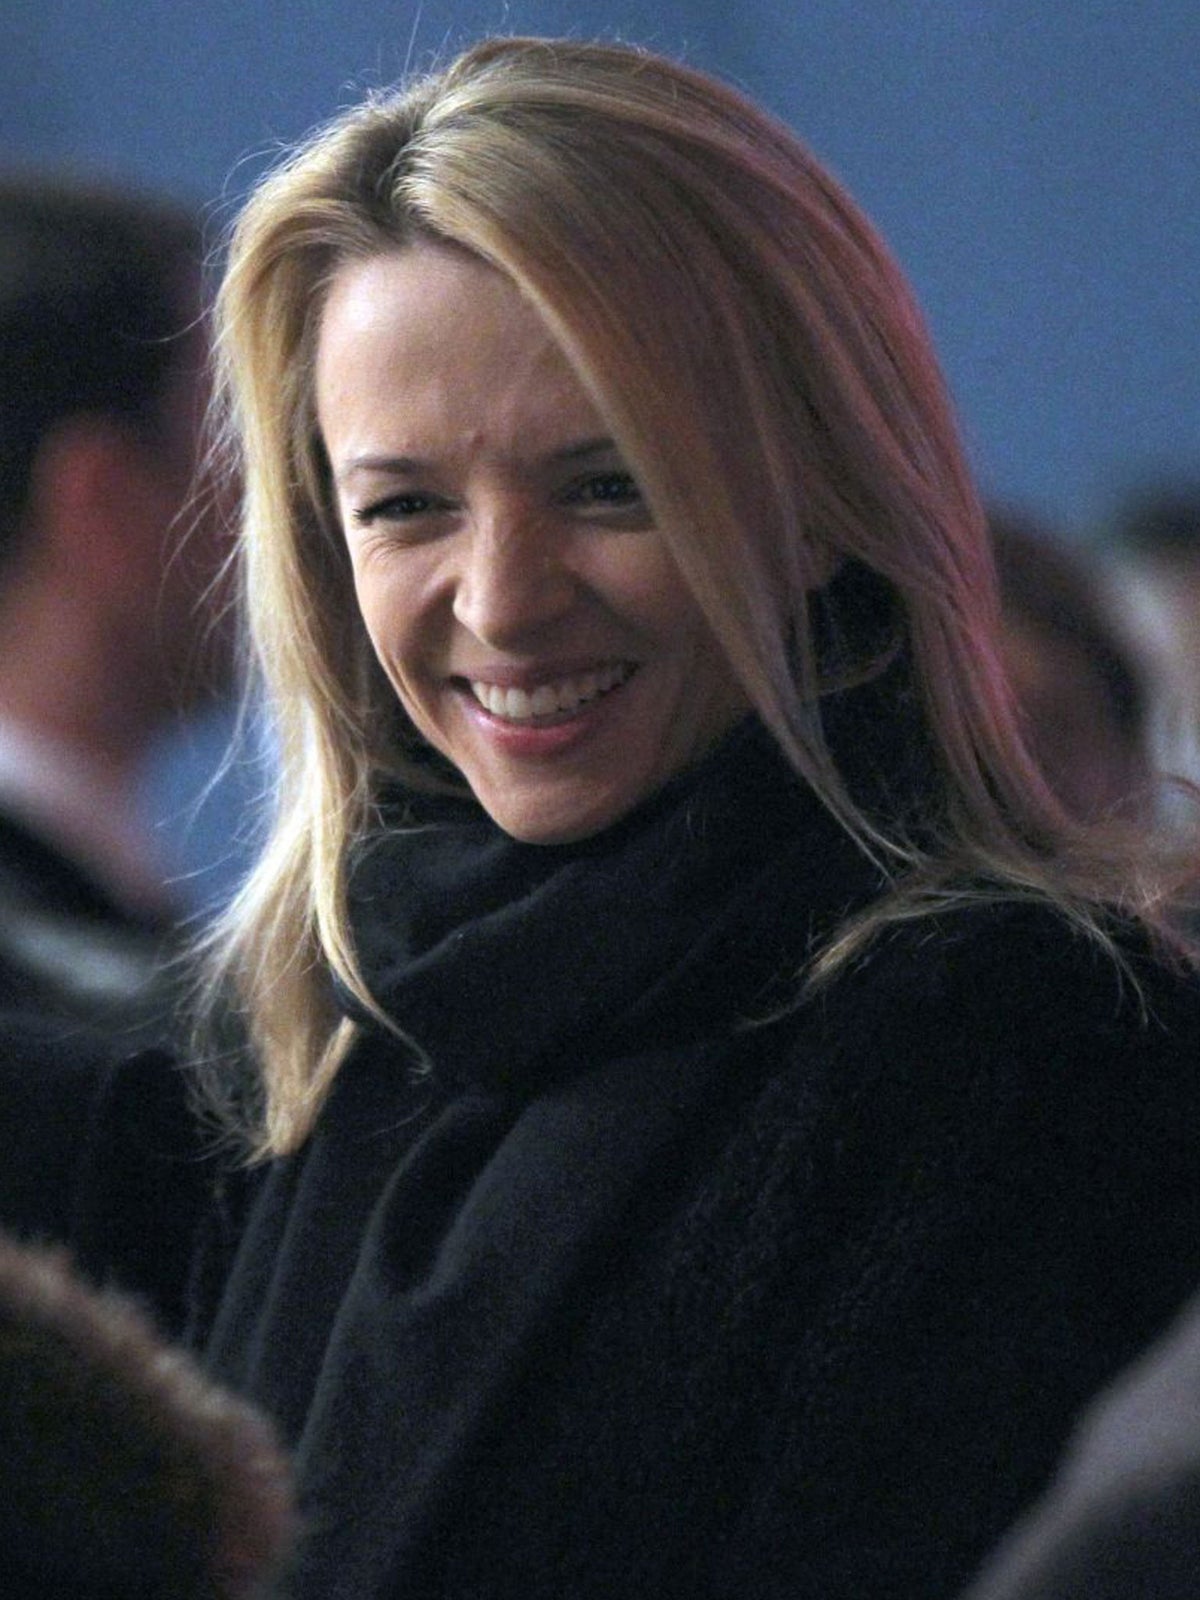 All you need to know about Delphine Arnault - Head of the iconic